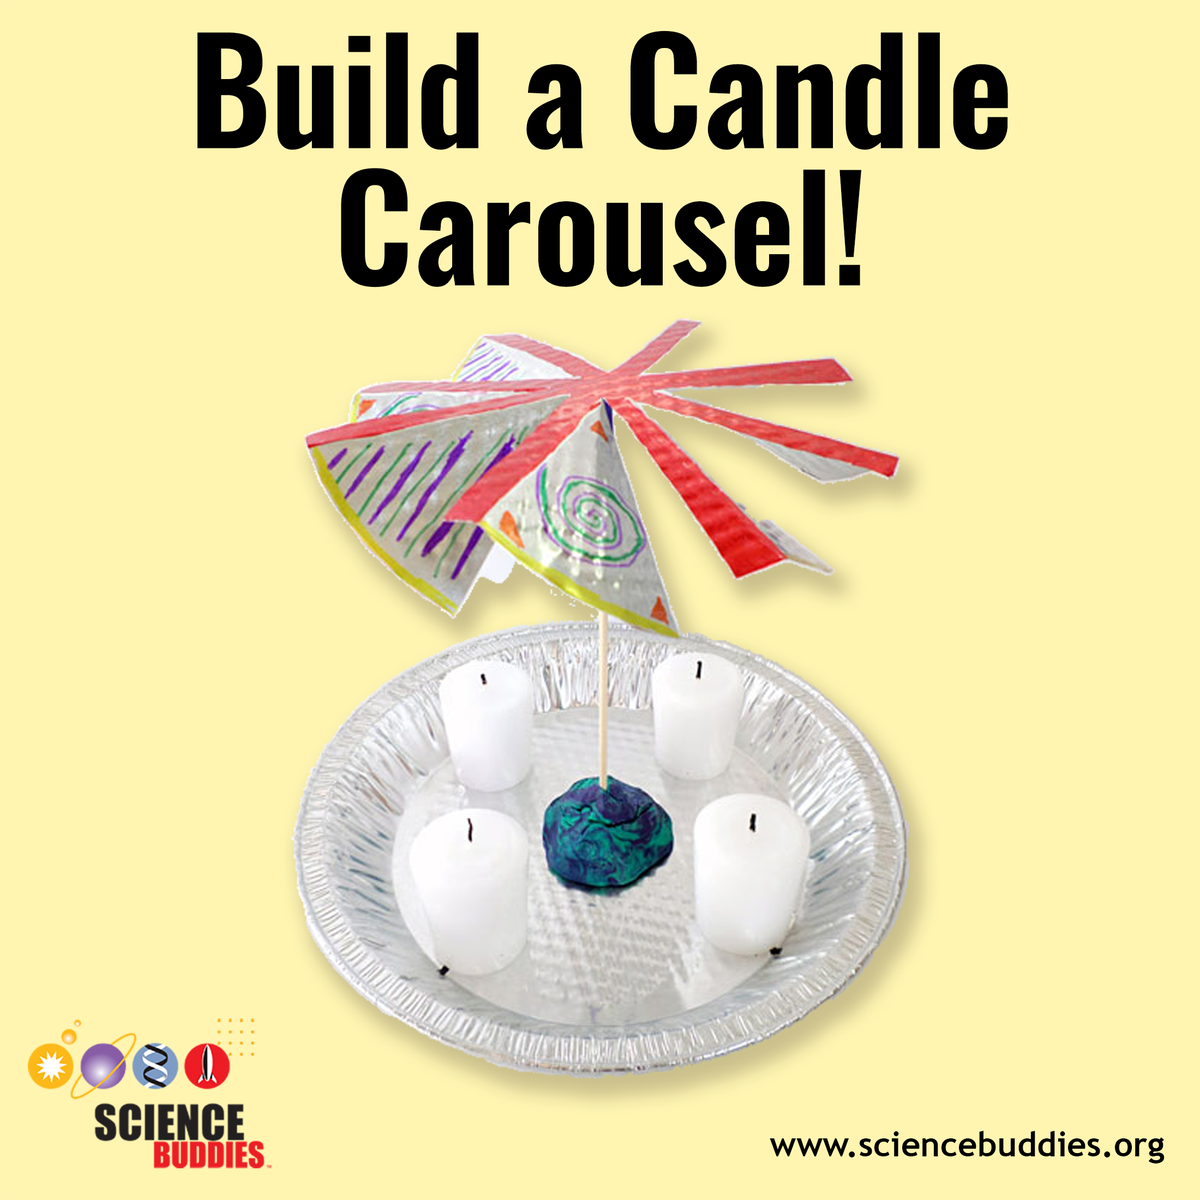 A candle carousel science project example - one of 15+ Winter-themed student science experiments